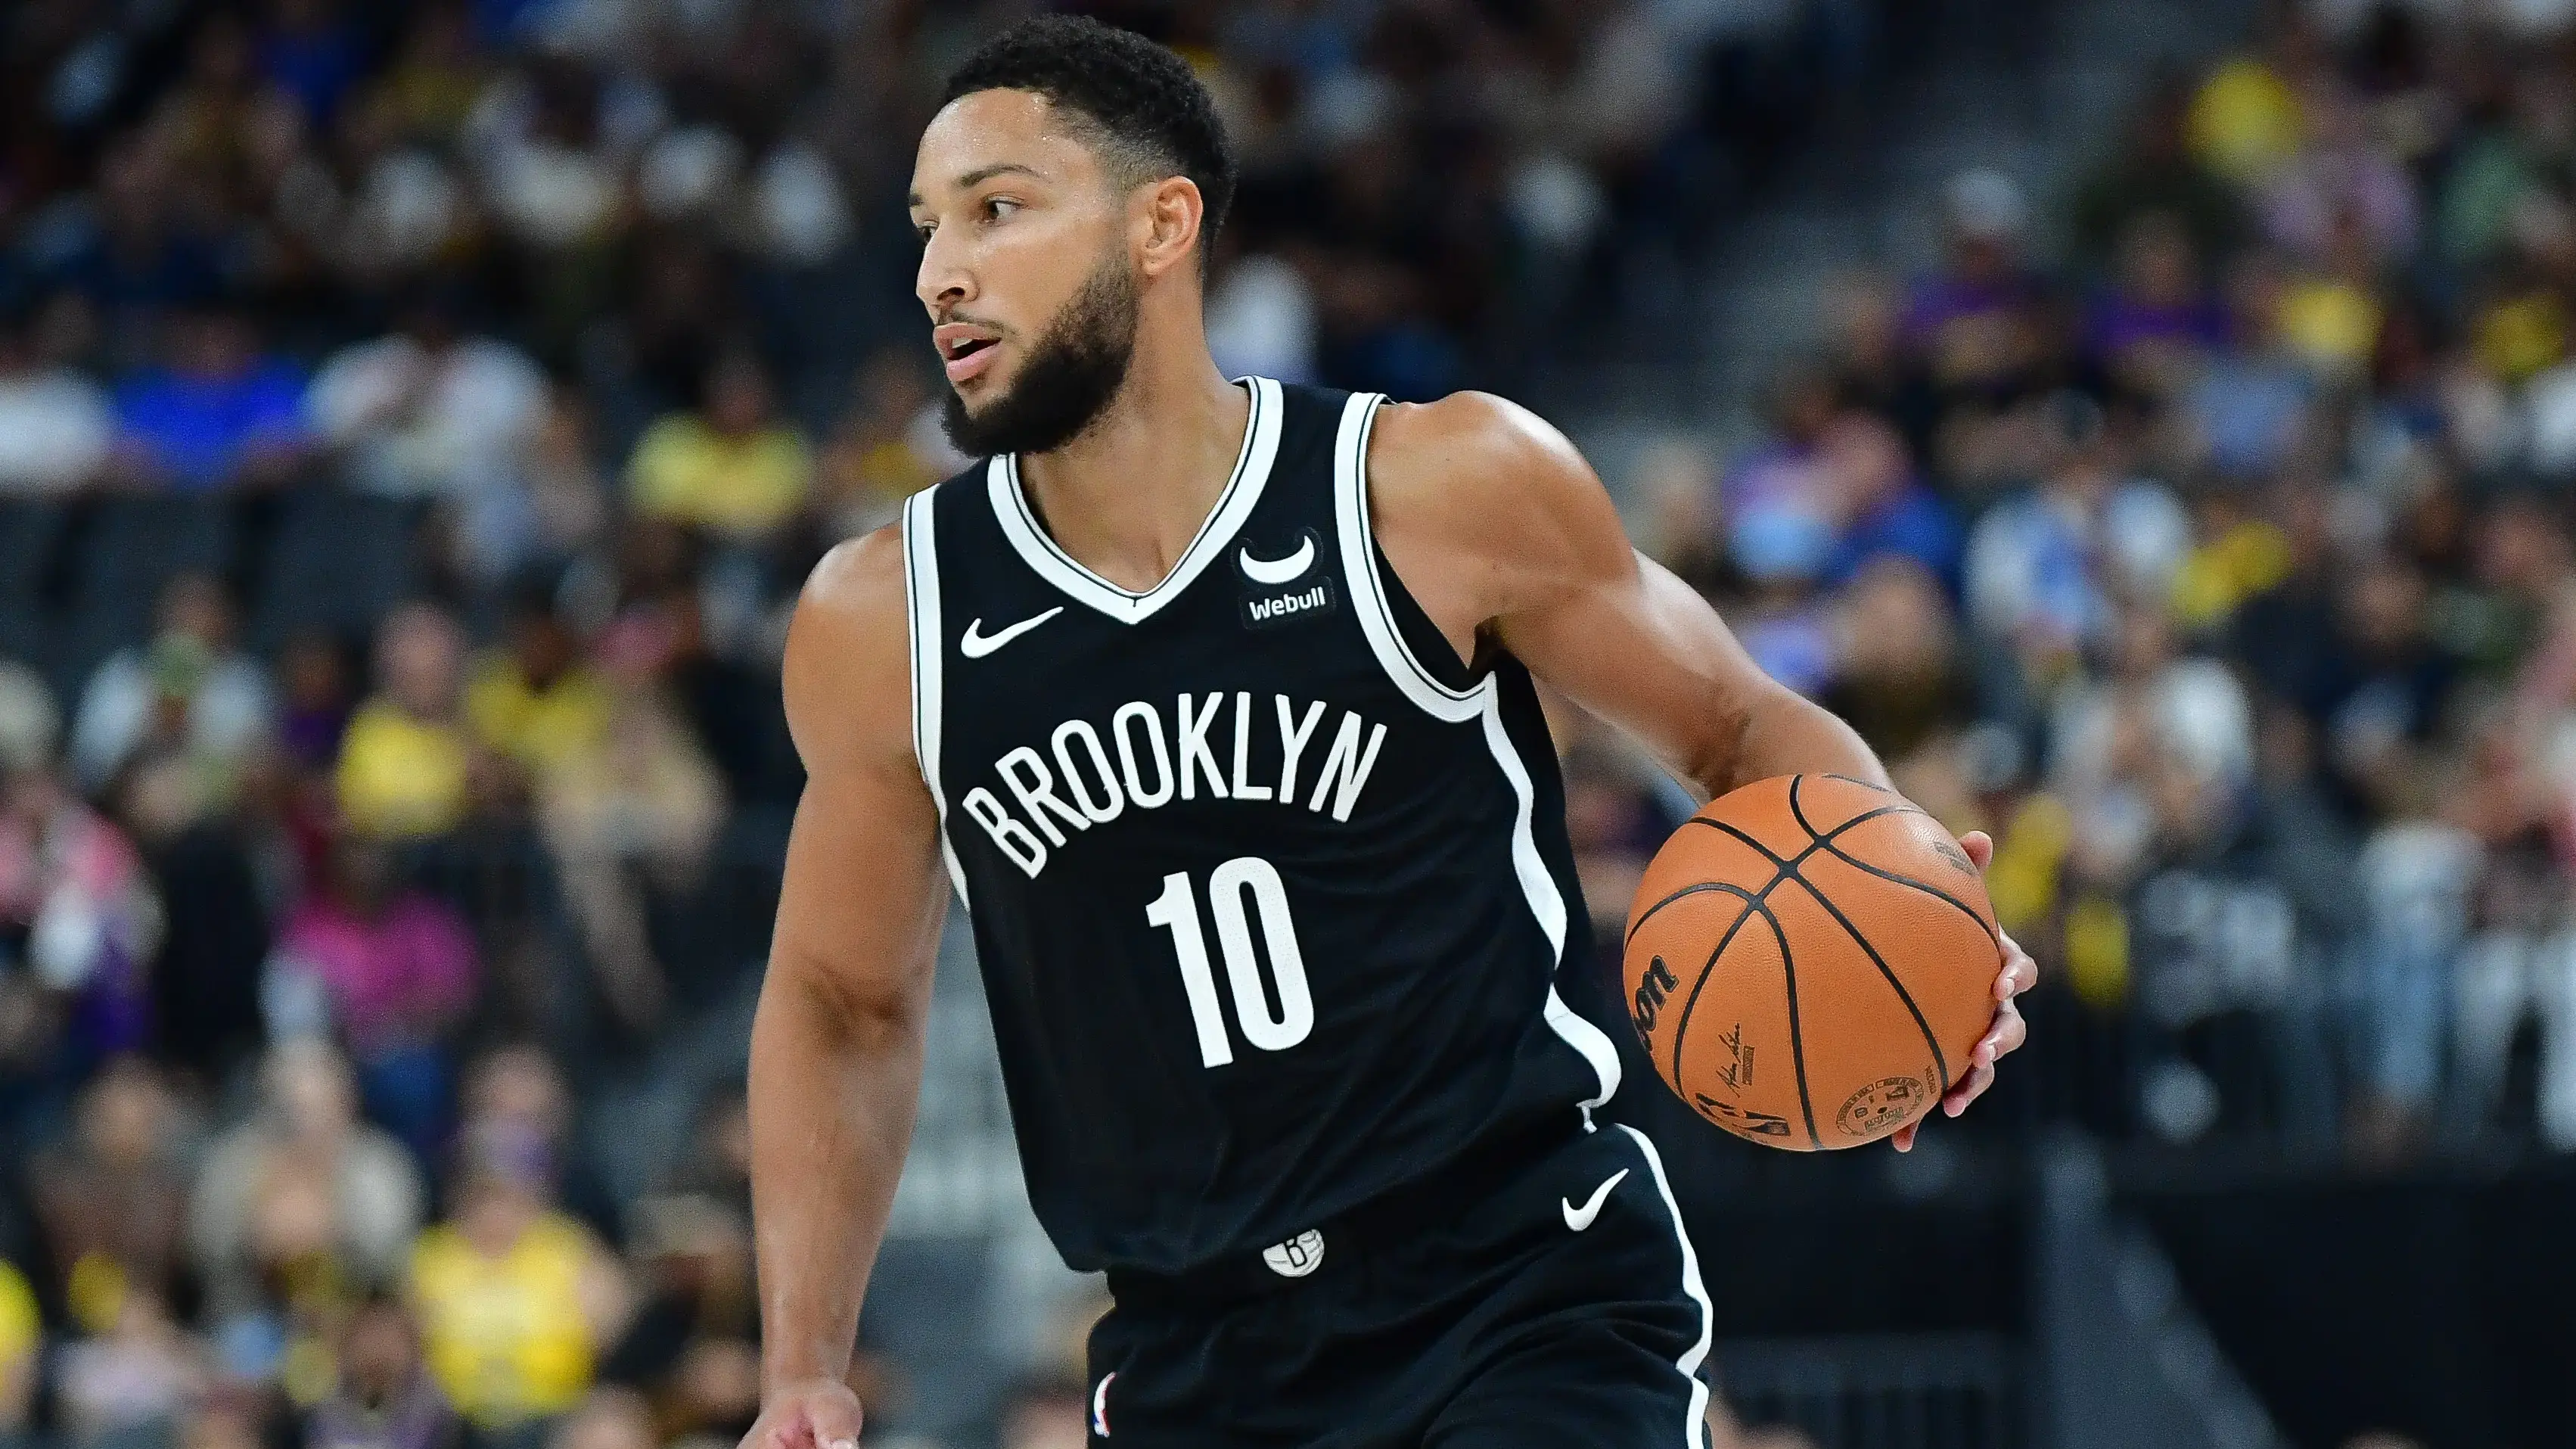 Brooklyn Nets guard Ben Simmons (10) moves the ball up court against the Los Angeles Lakers during the first half at T-Mobile Arena / Gary A. Vasquez - USA TODAY Sports